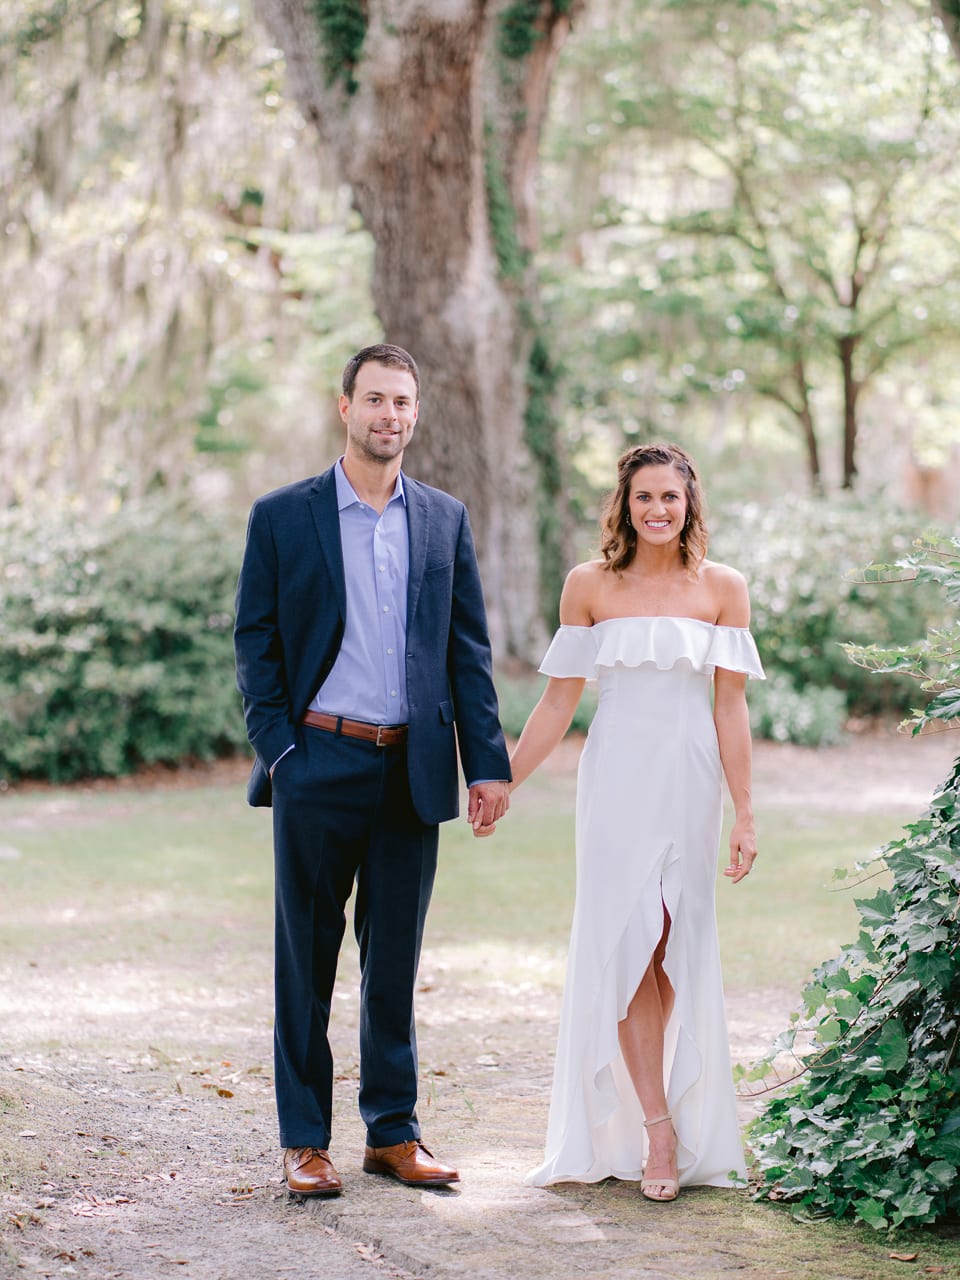 Engagement Pictures at Mansfield Plantation - Engagement Photography in Charleston SC